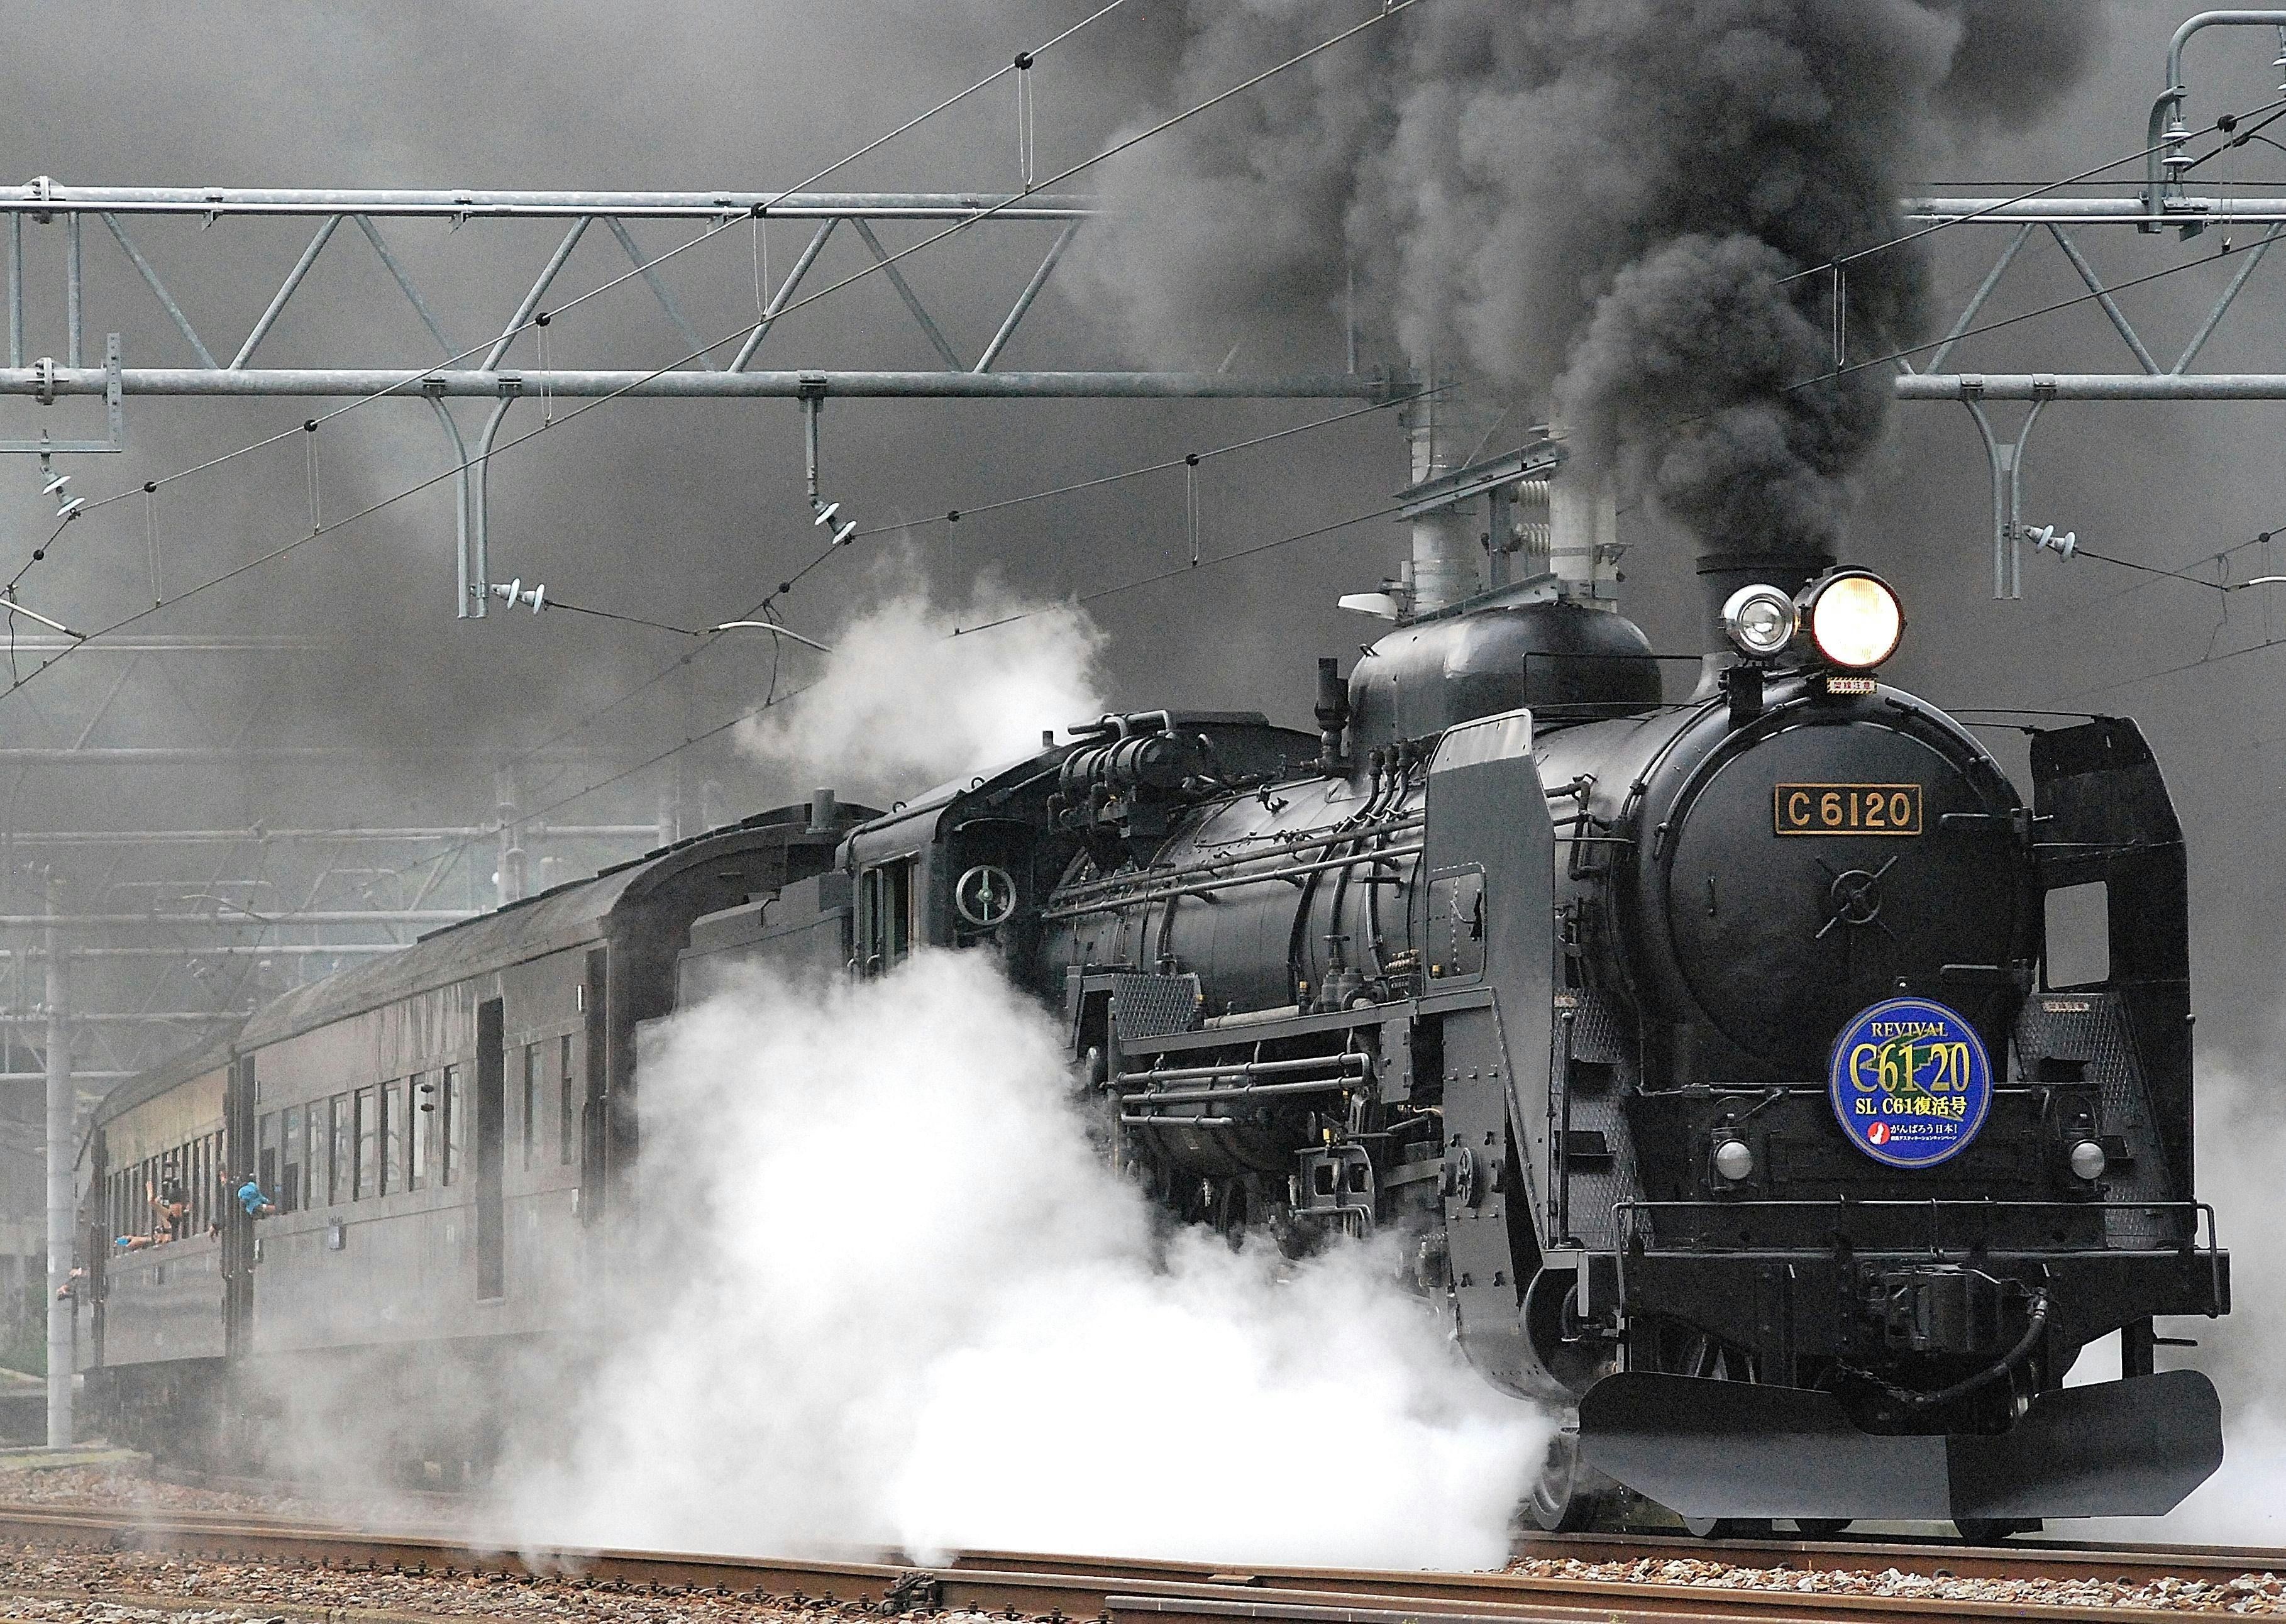 A train on rail and showing smoke. | Photo: Pexels